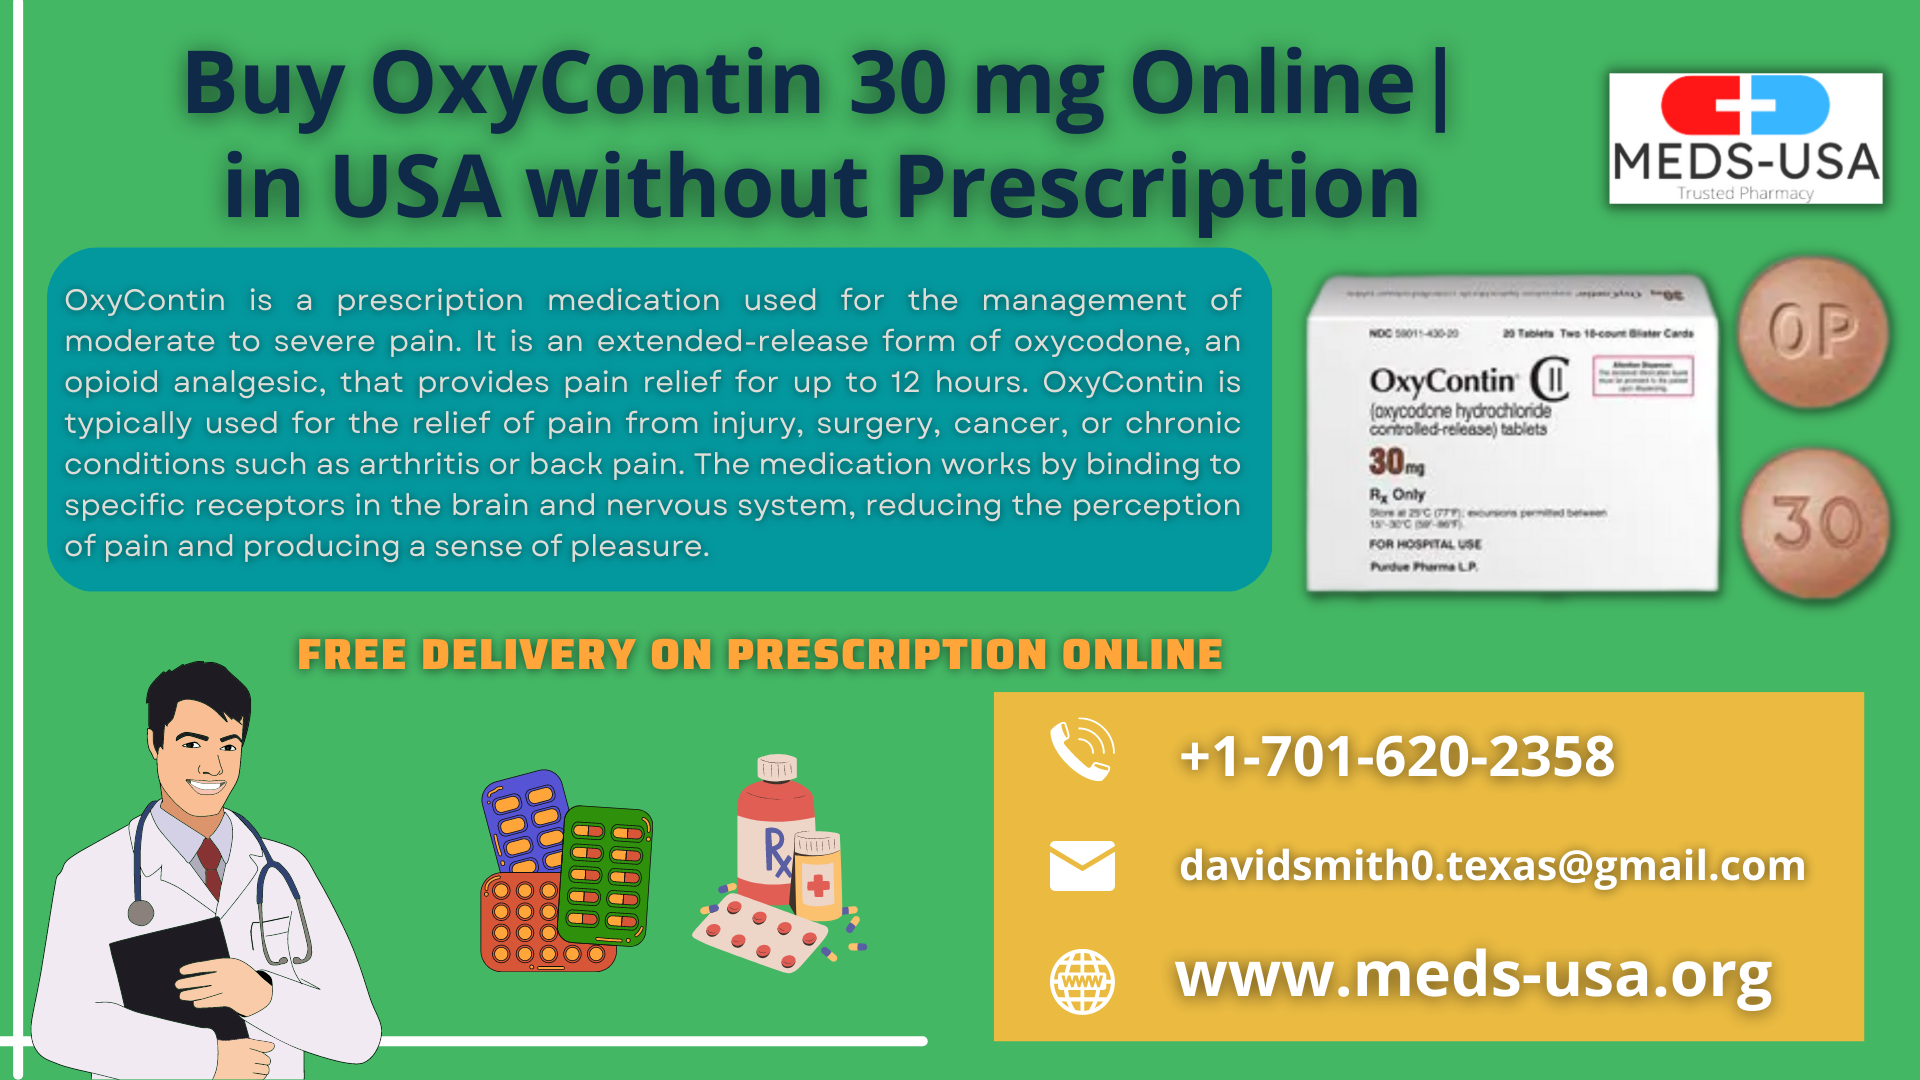 Buy OxyContin 30 mg Online Legally in USA